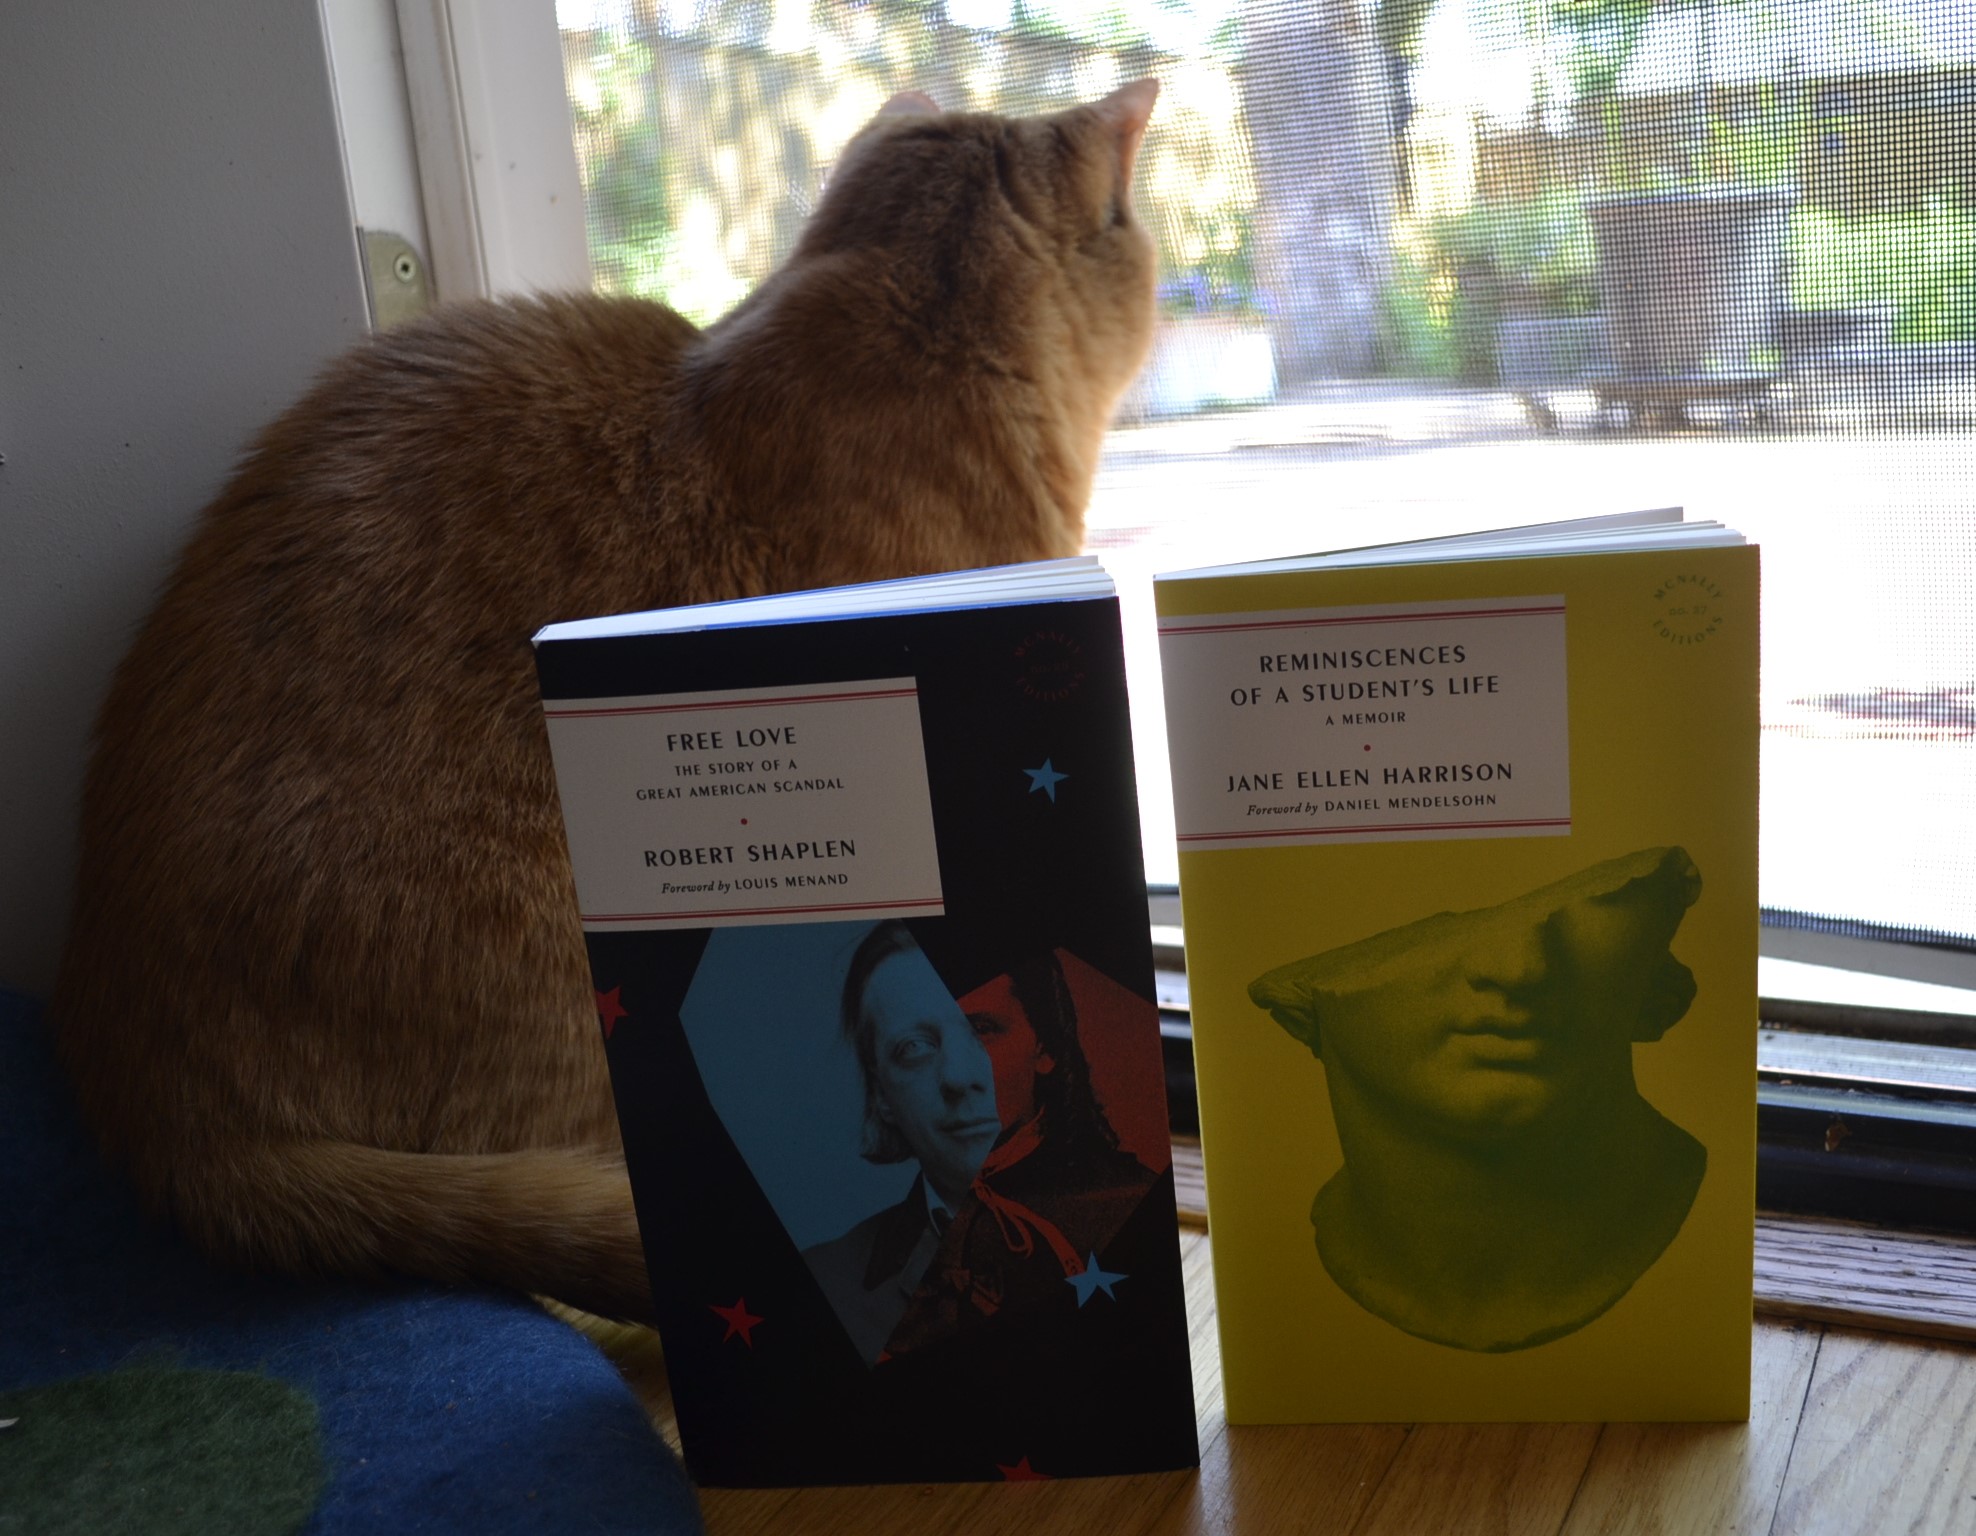 An orange cat looks out a window. In front of her are two books: Free Love and Reminiscences of a Student's Life.